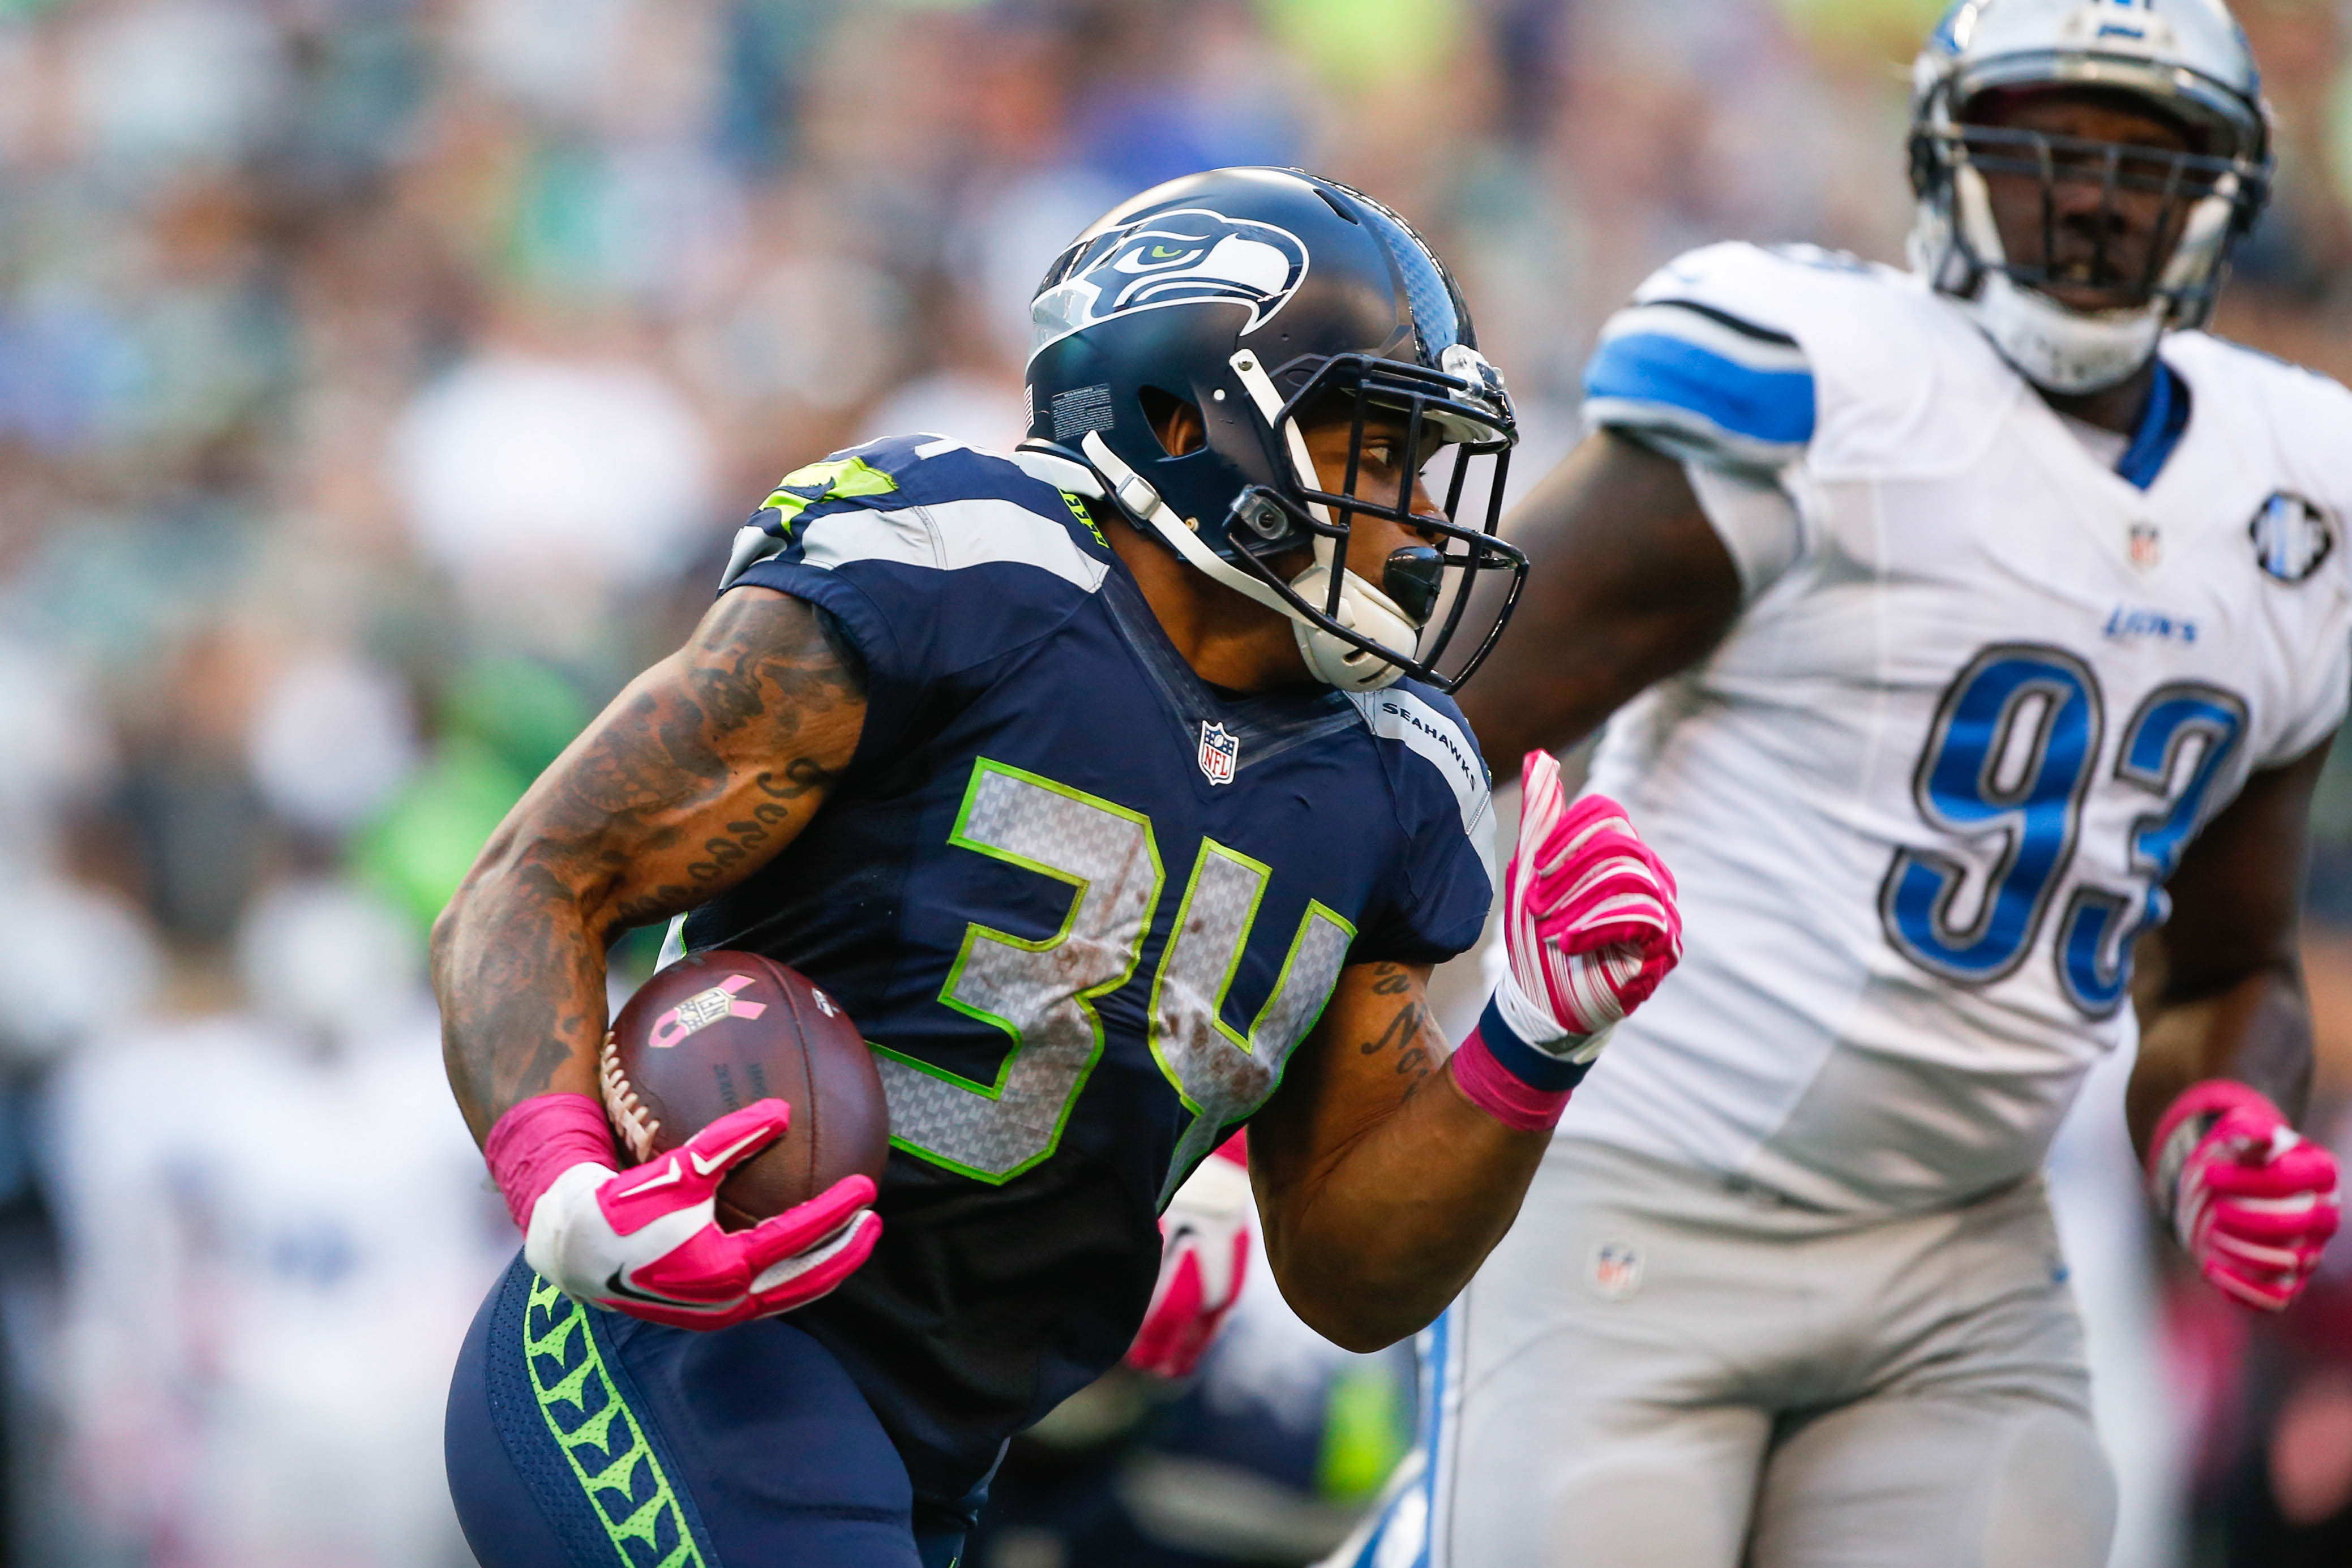 If he can shake off injury & committee concerns, Thomas Rawls has high-end RB1 upside in 2016.